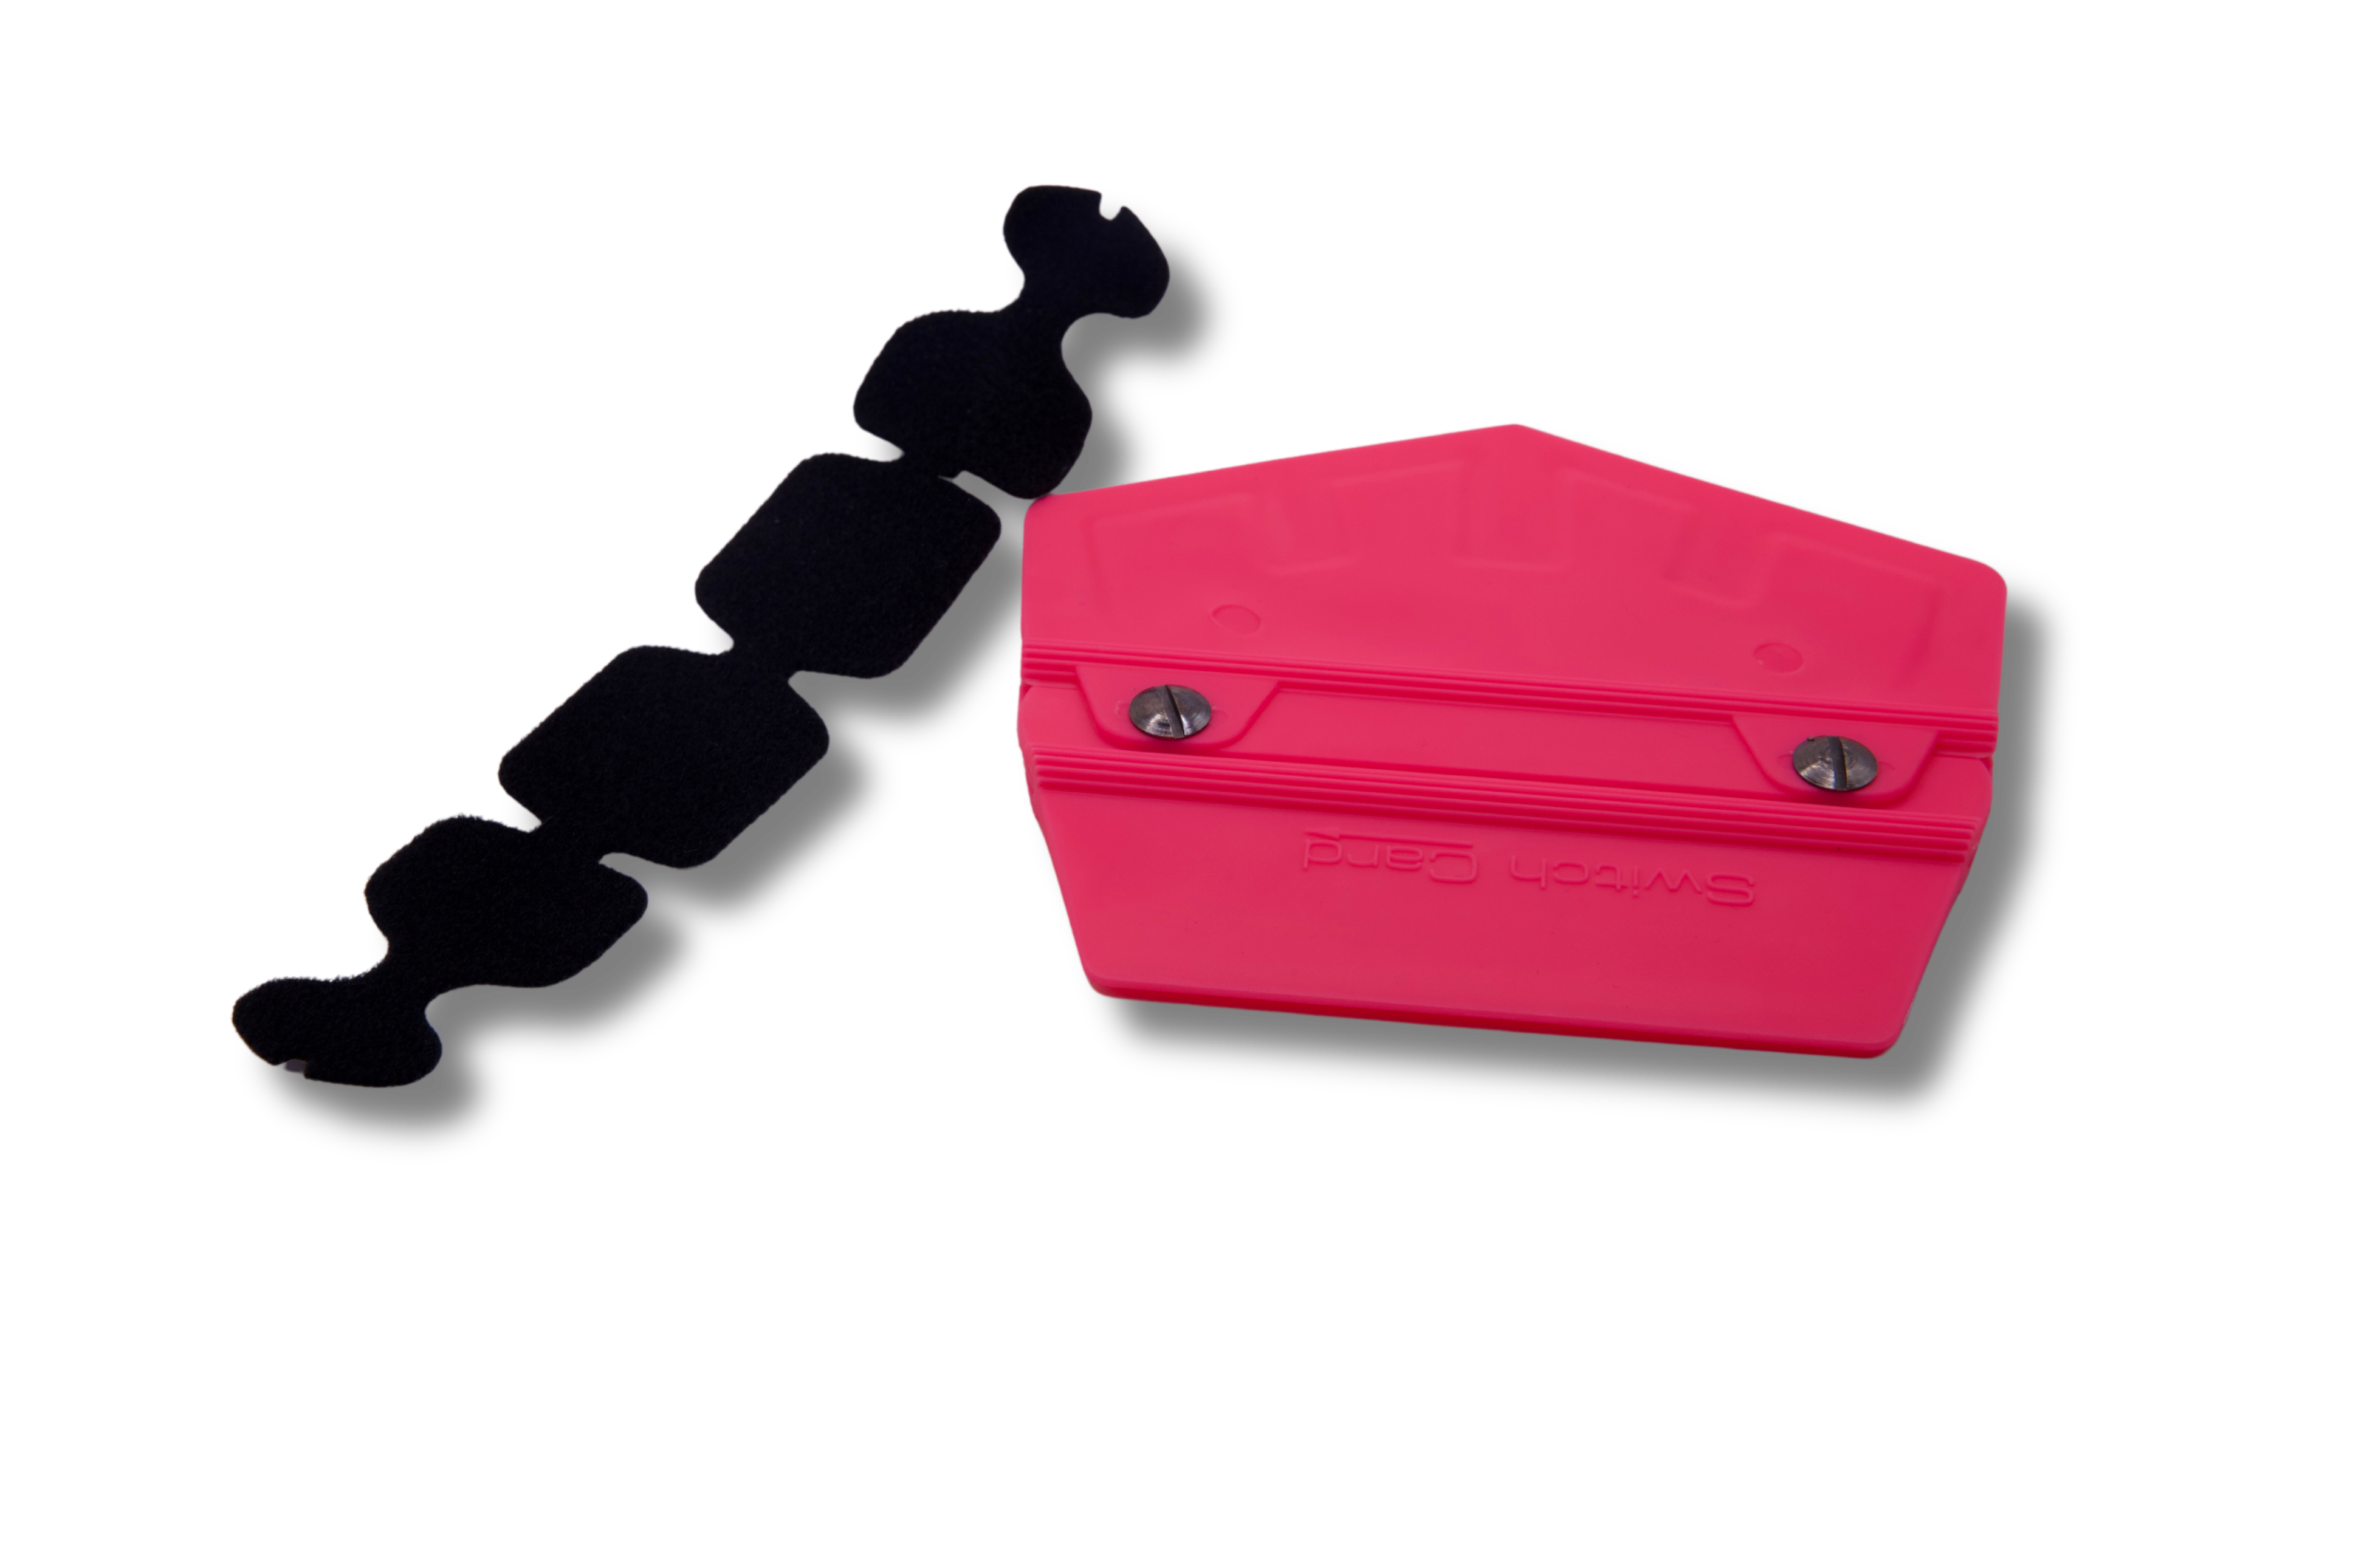 Ergonomic and precise Pink Switch Squeegee D for car wrap applications.